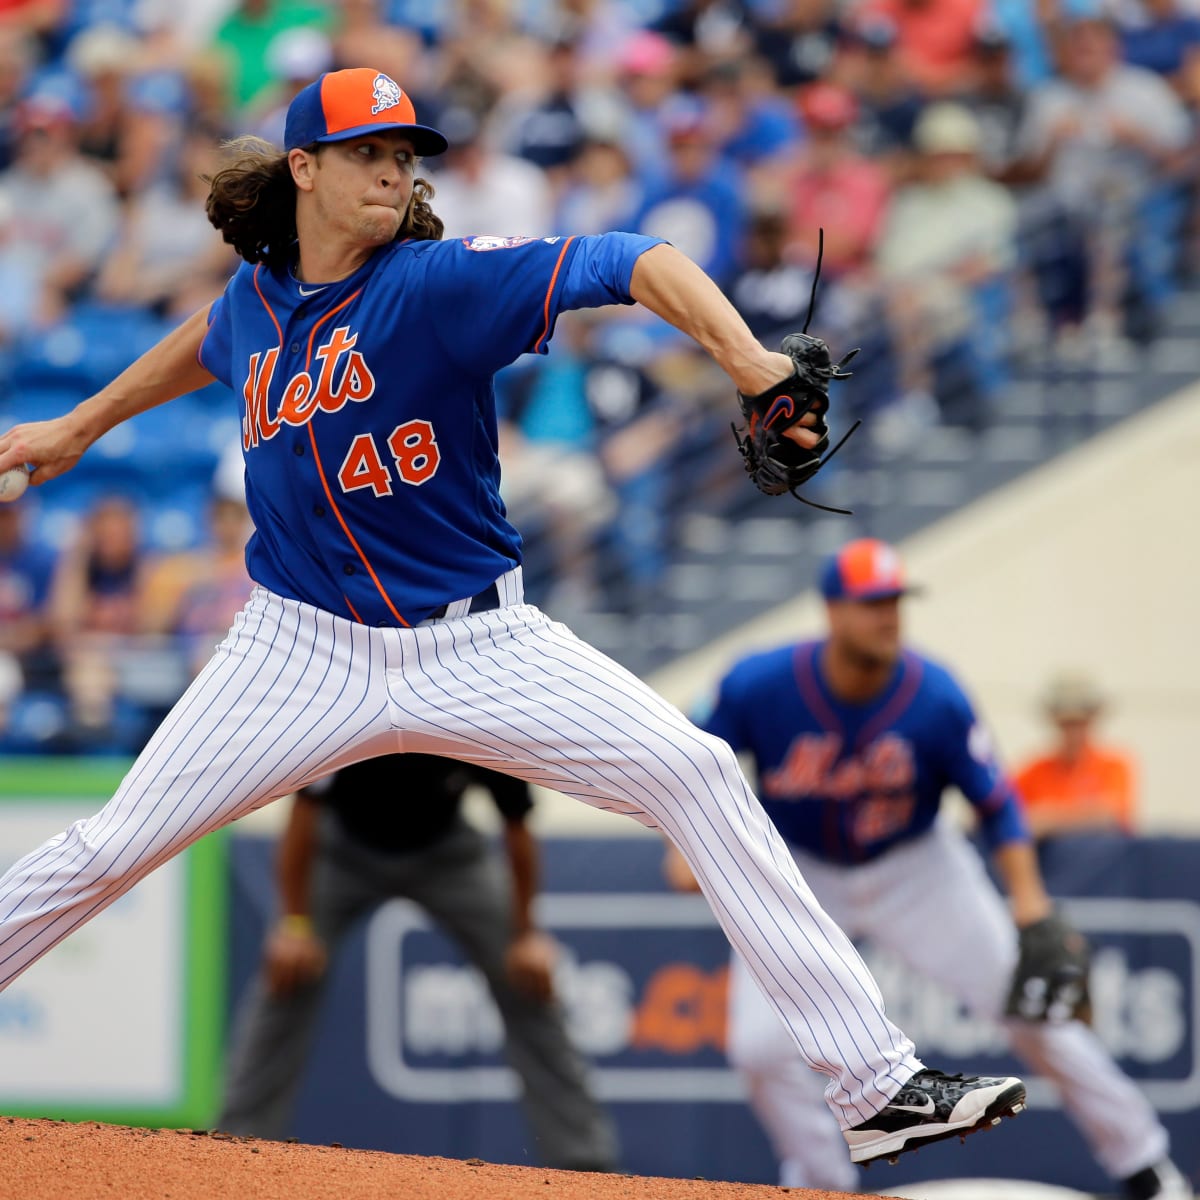 Jacob deGrom may miss Mets' opening series for son's birth